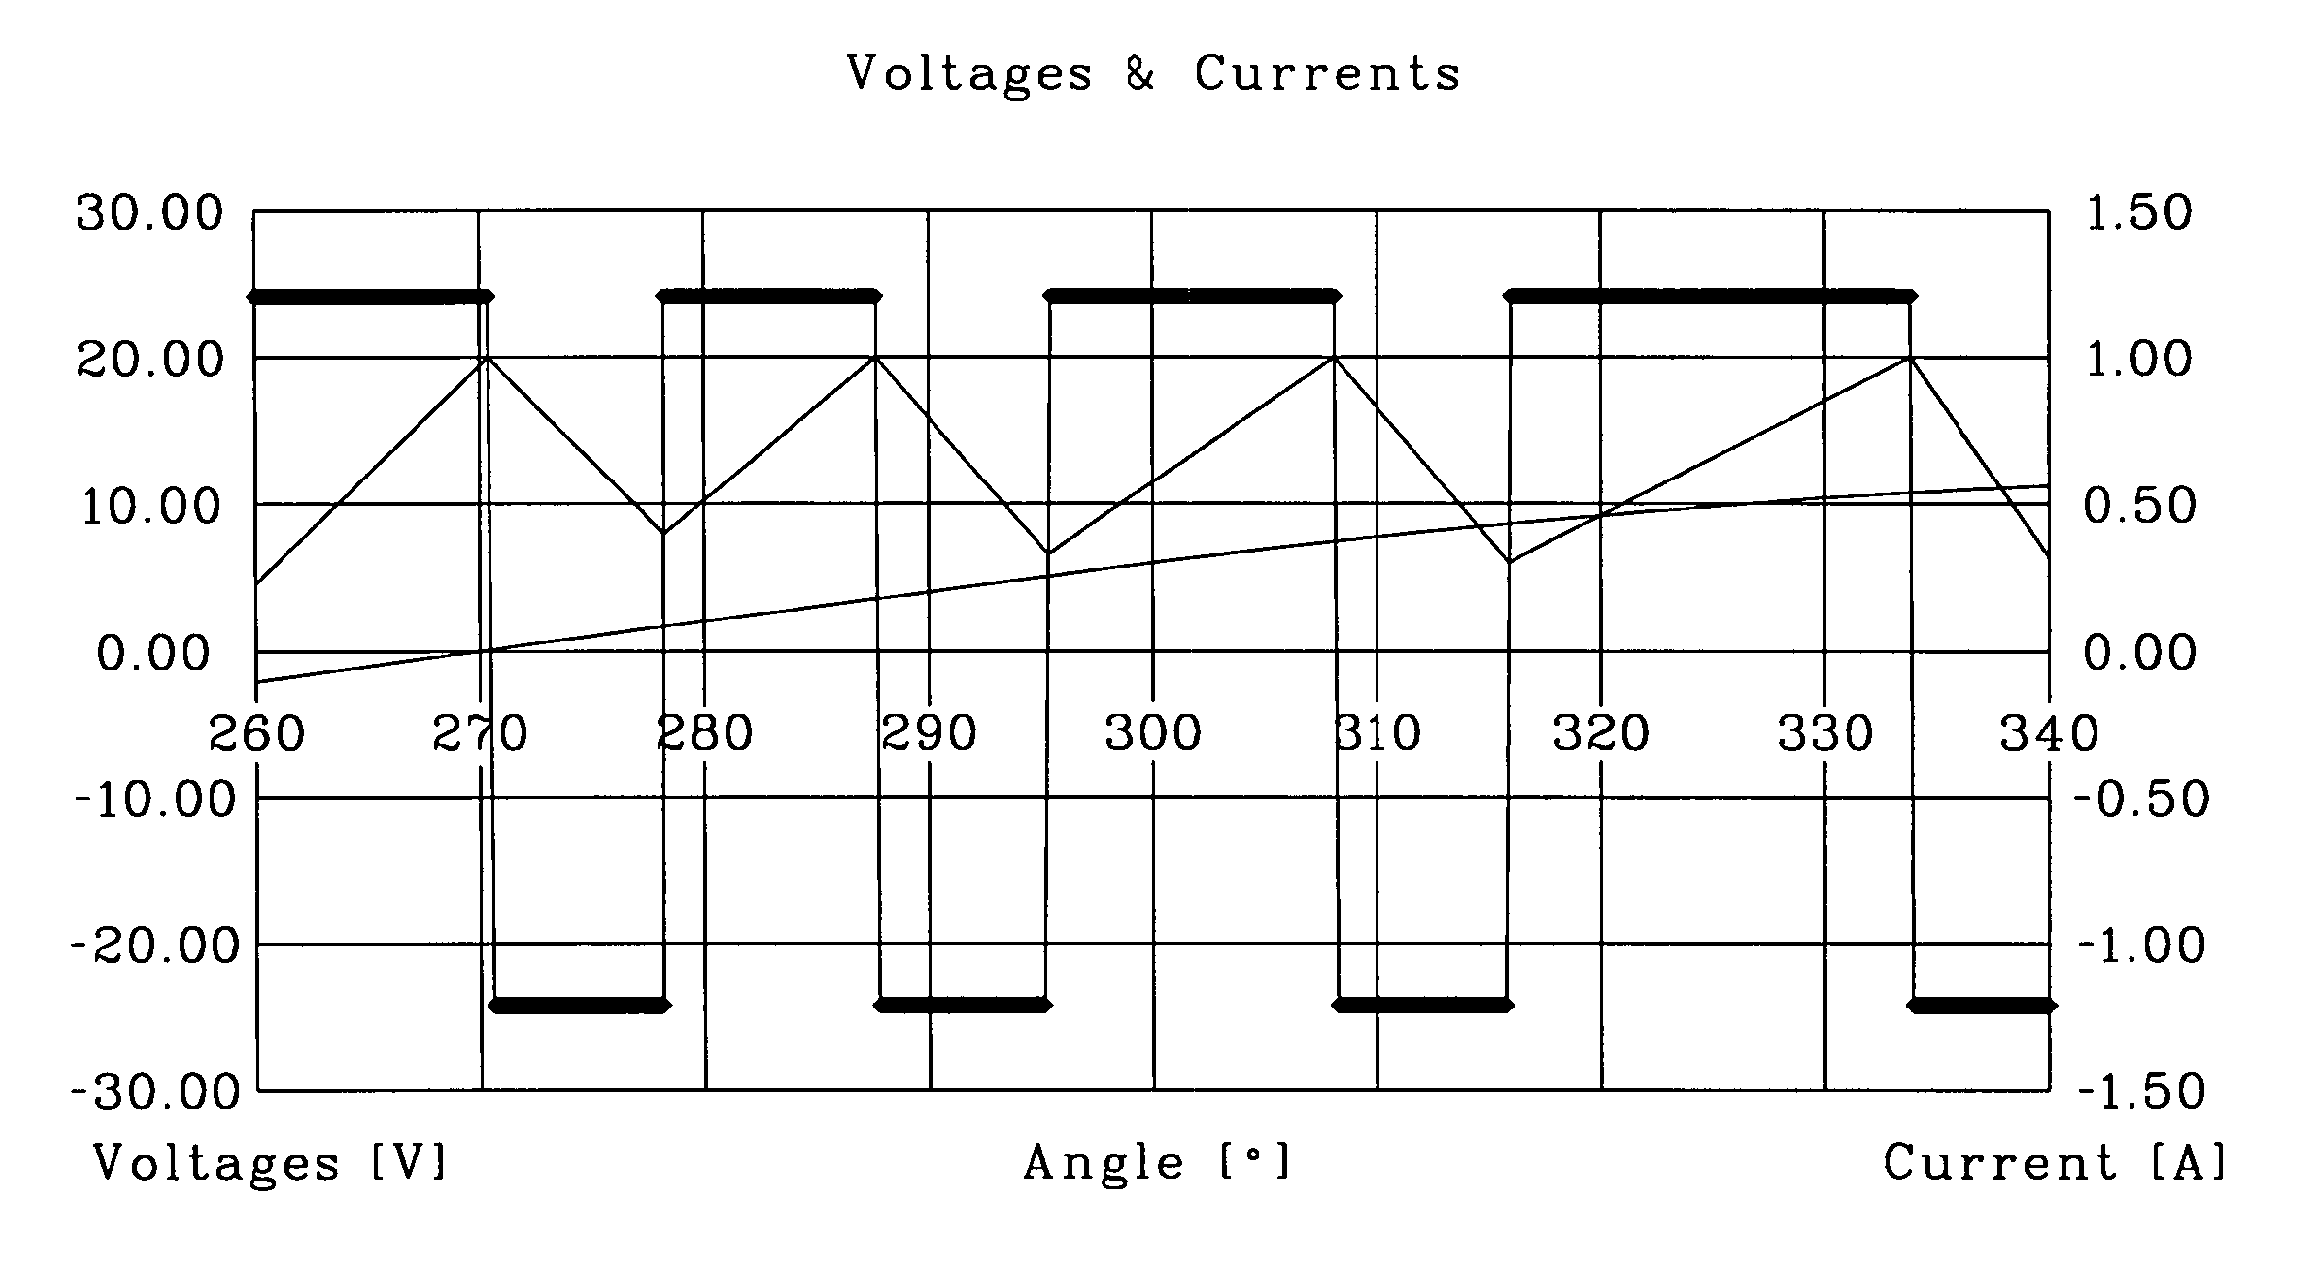 Sensorless technology, estimation of sampled back EMF voltage values and/or the sampled inductance values based on the pulse width modulation periods